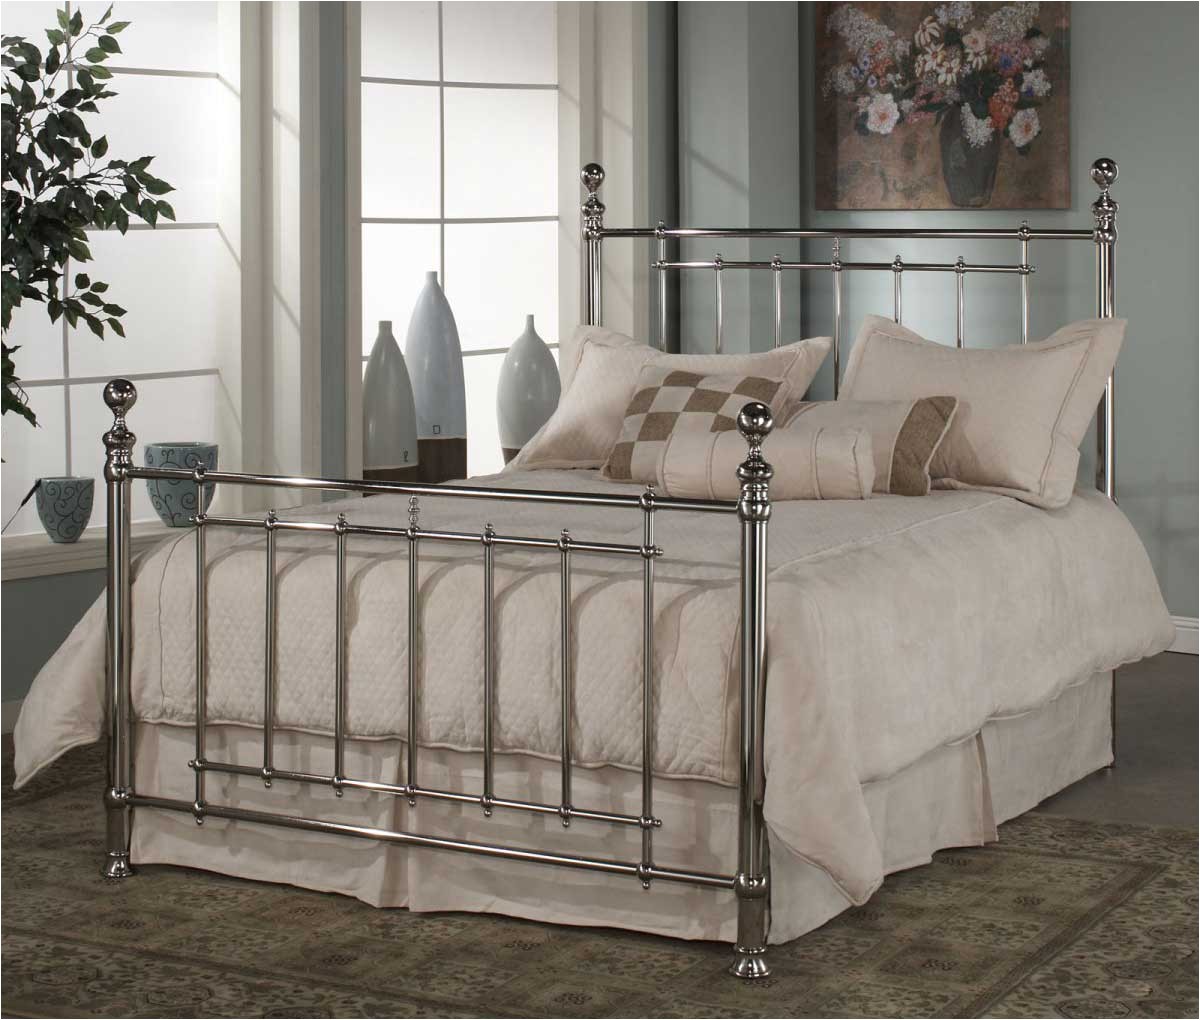 how to determine age of an antique metal bed frame